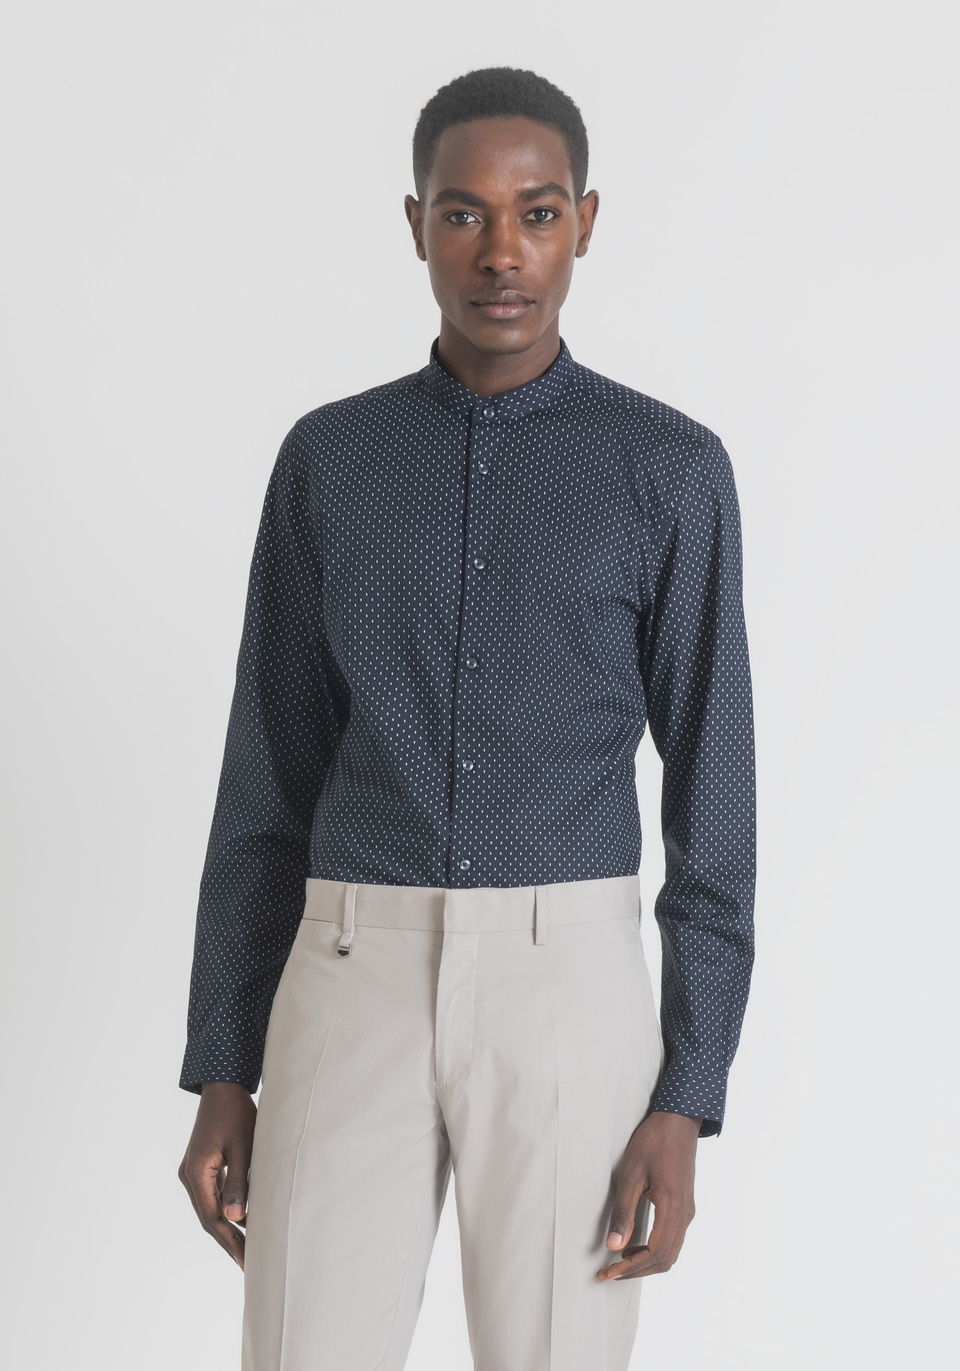 SLIM-FIT SHIRT IN SOFT-TOUCH PURE COTTON WITH KOREAN COLLAR AND POLKA DOT MICRO PATTERN - Antony Morato Online Shop